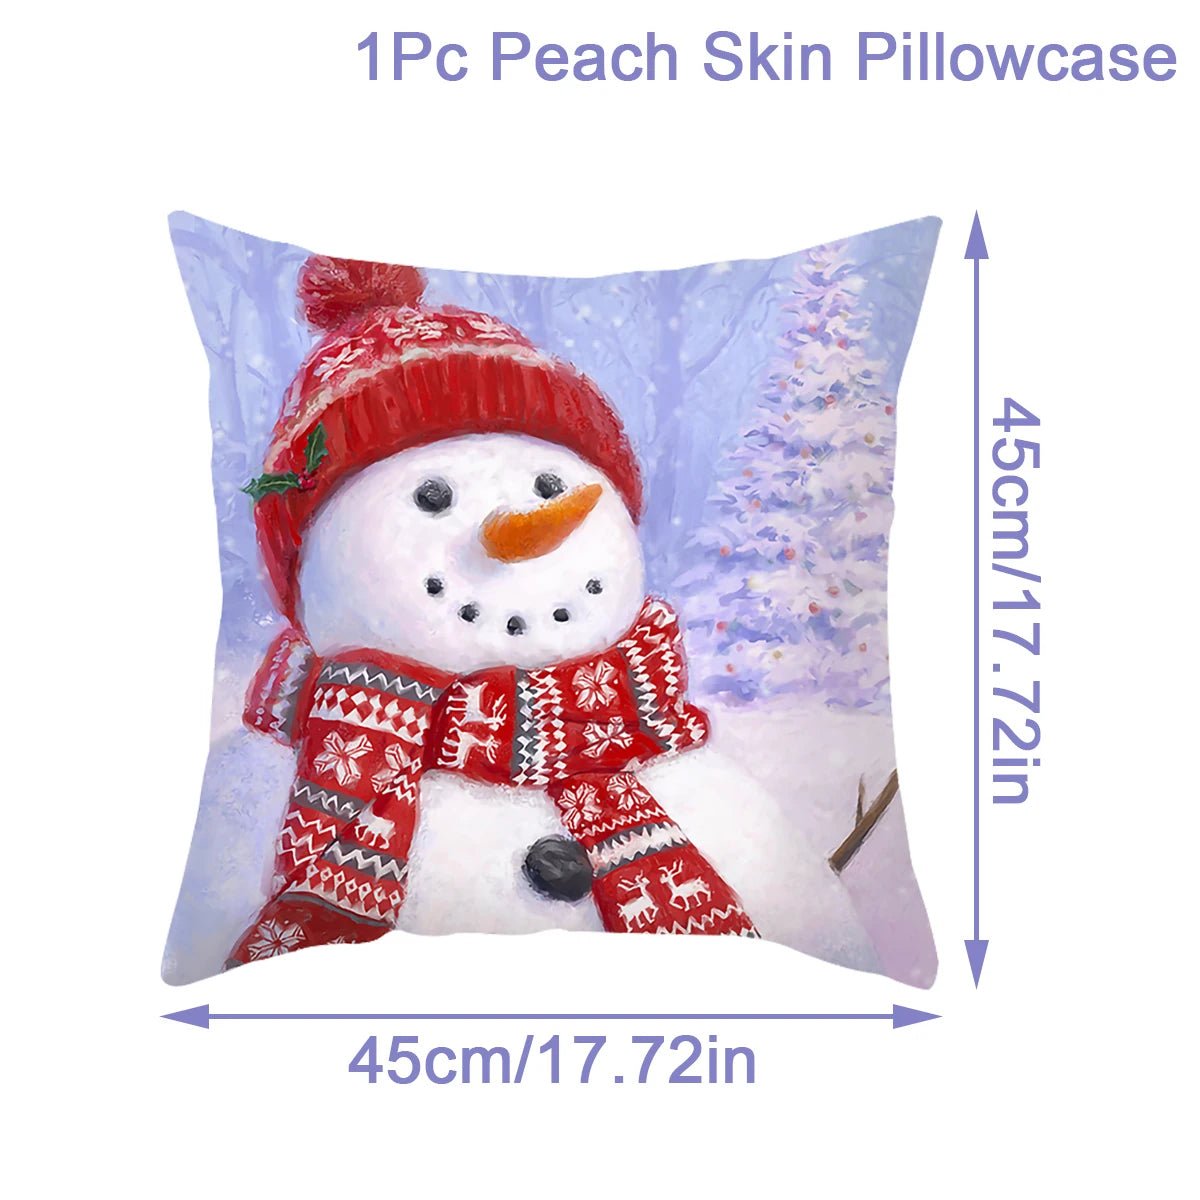 Christmas Cushion Cover - Sweet Sentimental GiftsChristmas Cushion CoverPillowsStaraiseSweet Sentimental Gifts91371532-53-as-pictureChristmas Cushion Coveras picture53530873936422